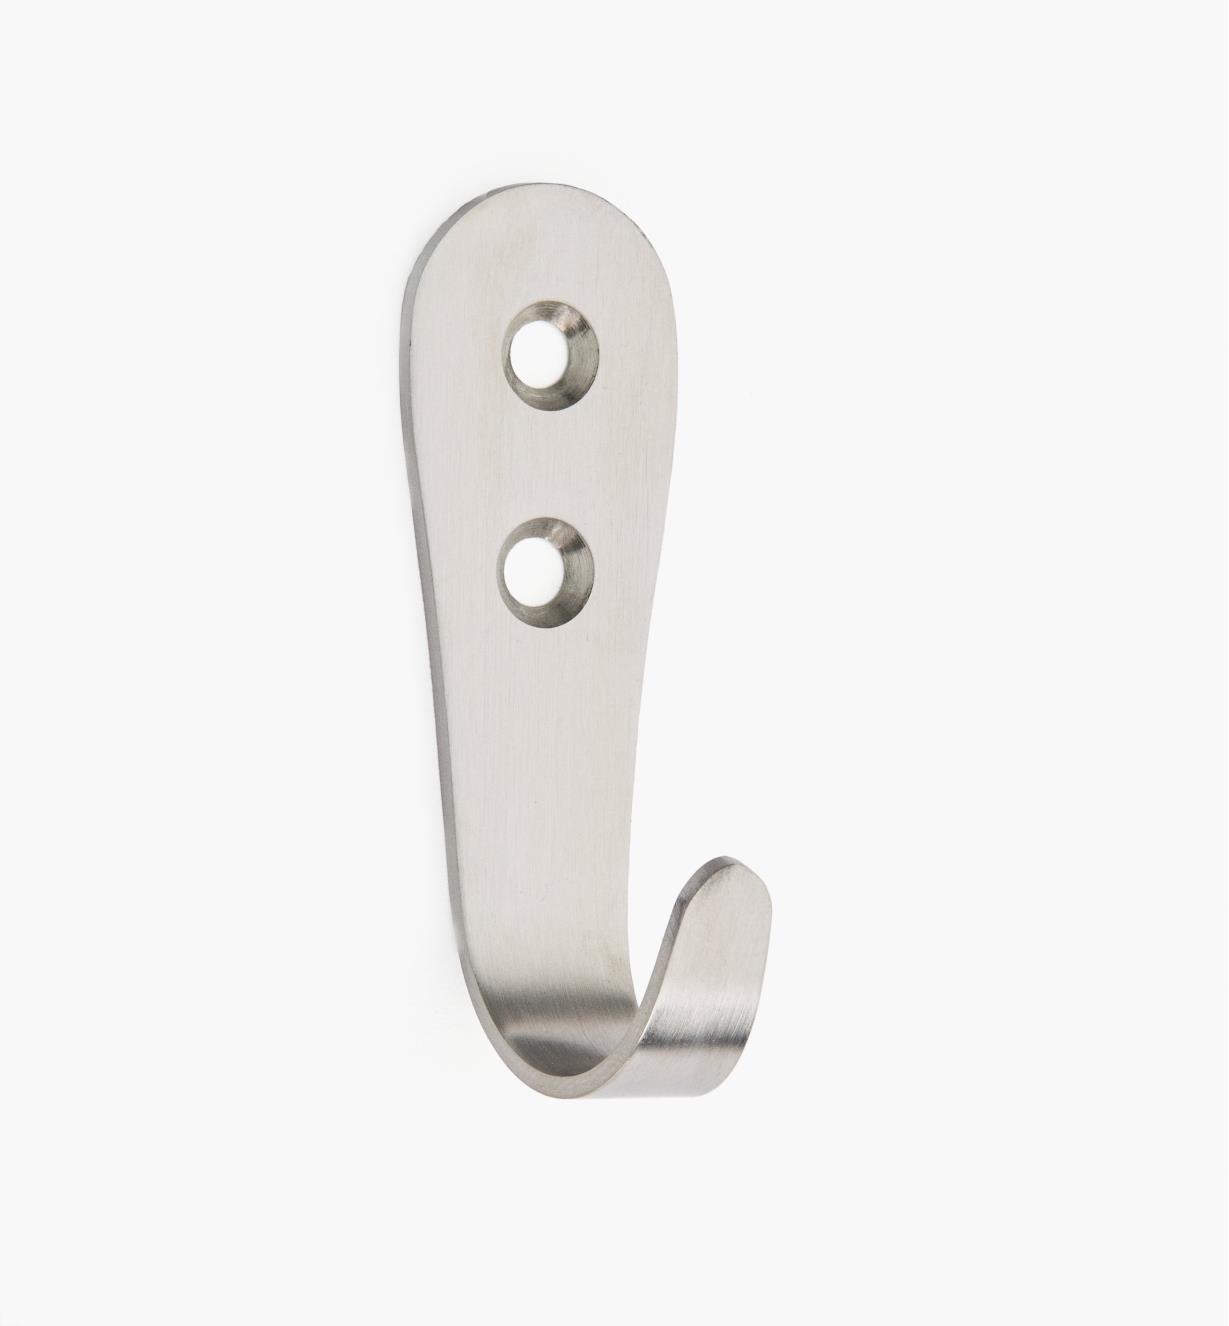 00S6014 - Stainless-Steel Utility Hook